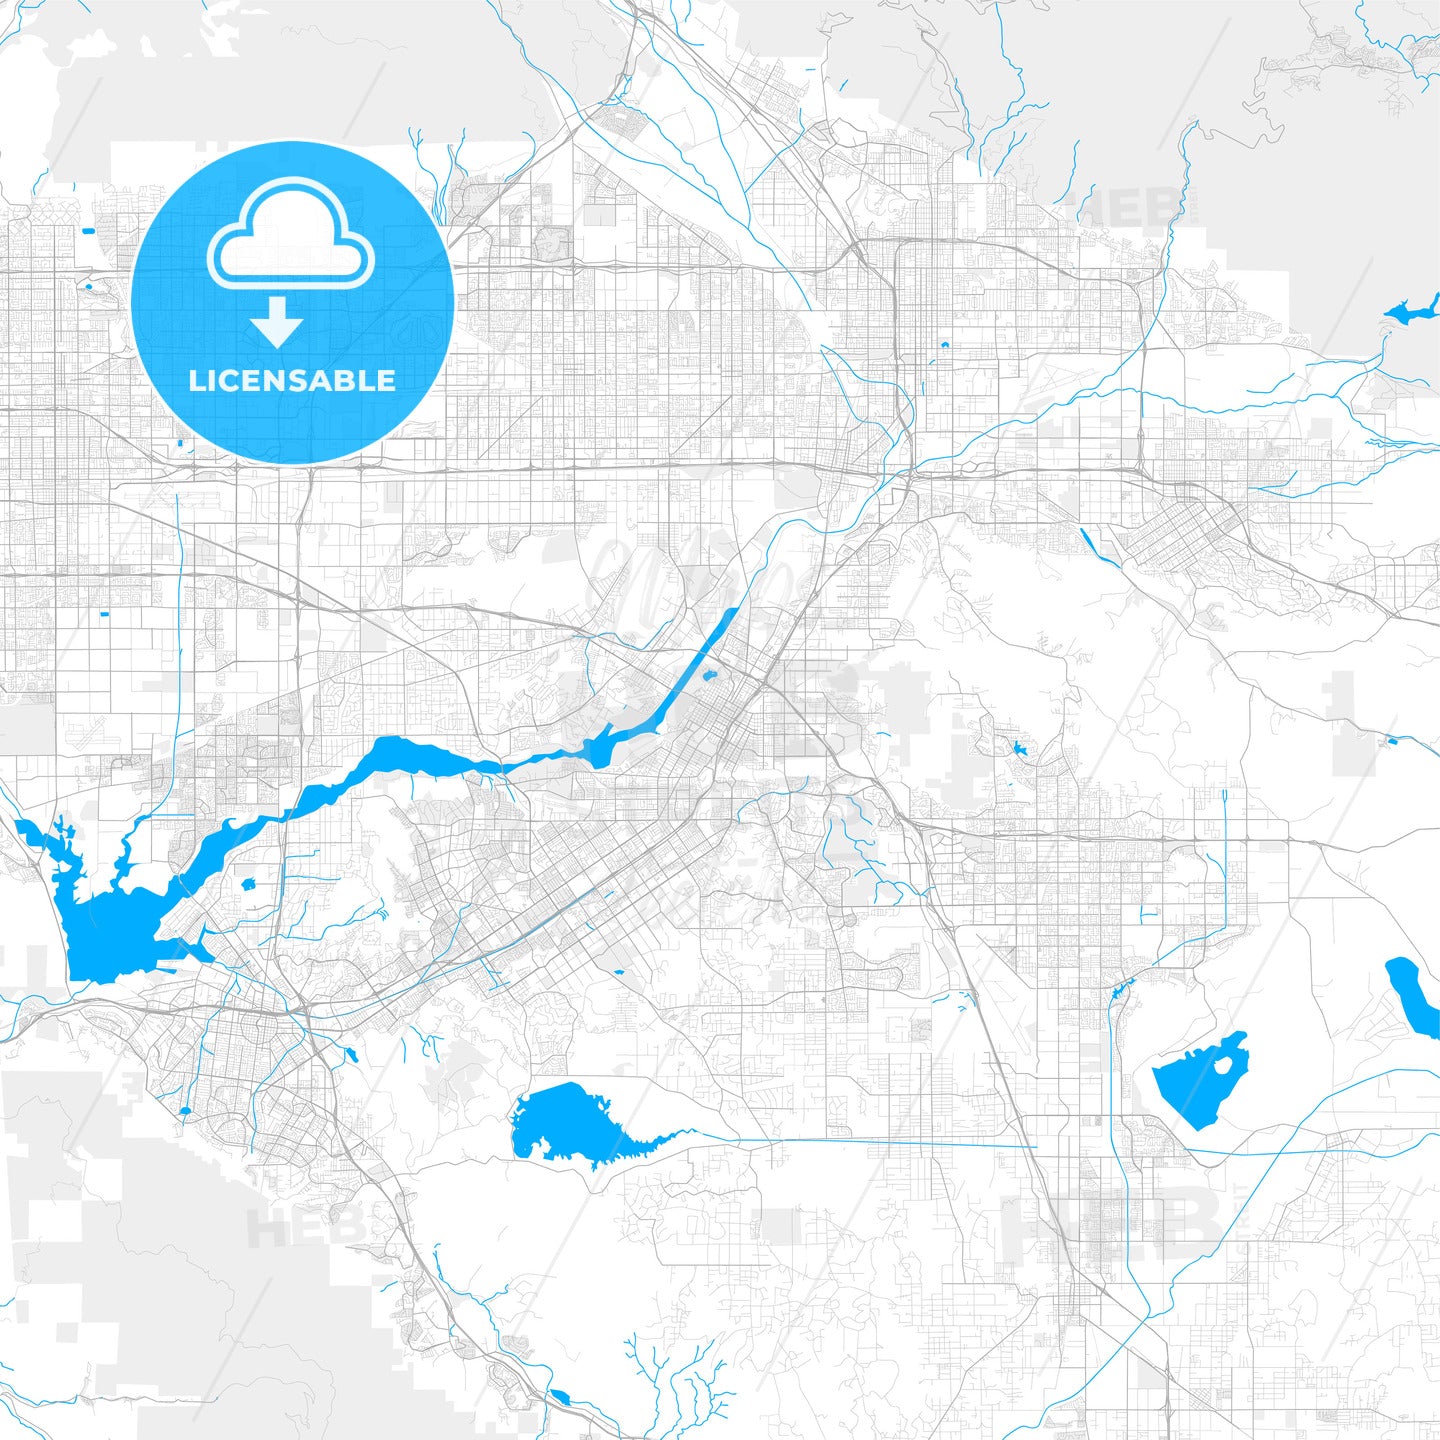 Rich detailed vector map of Riverside, California, U.S.A.